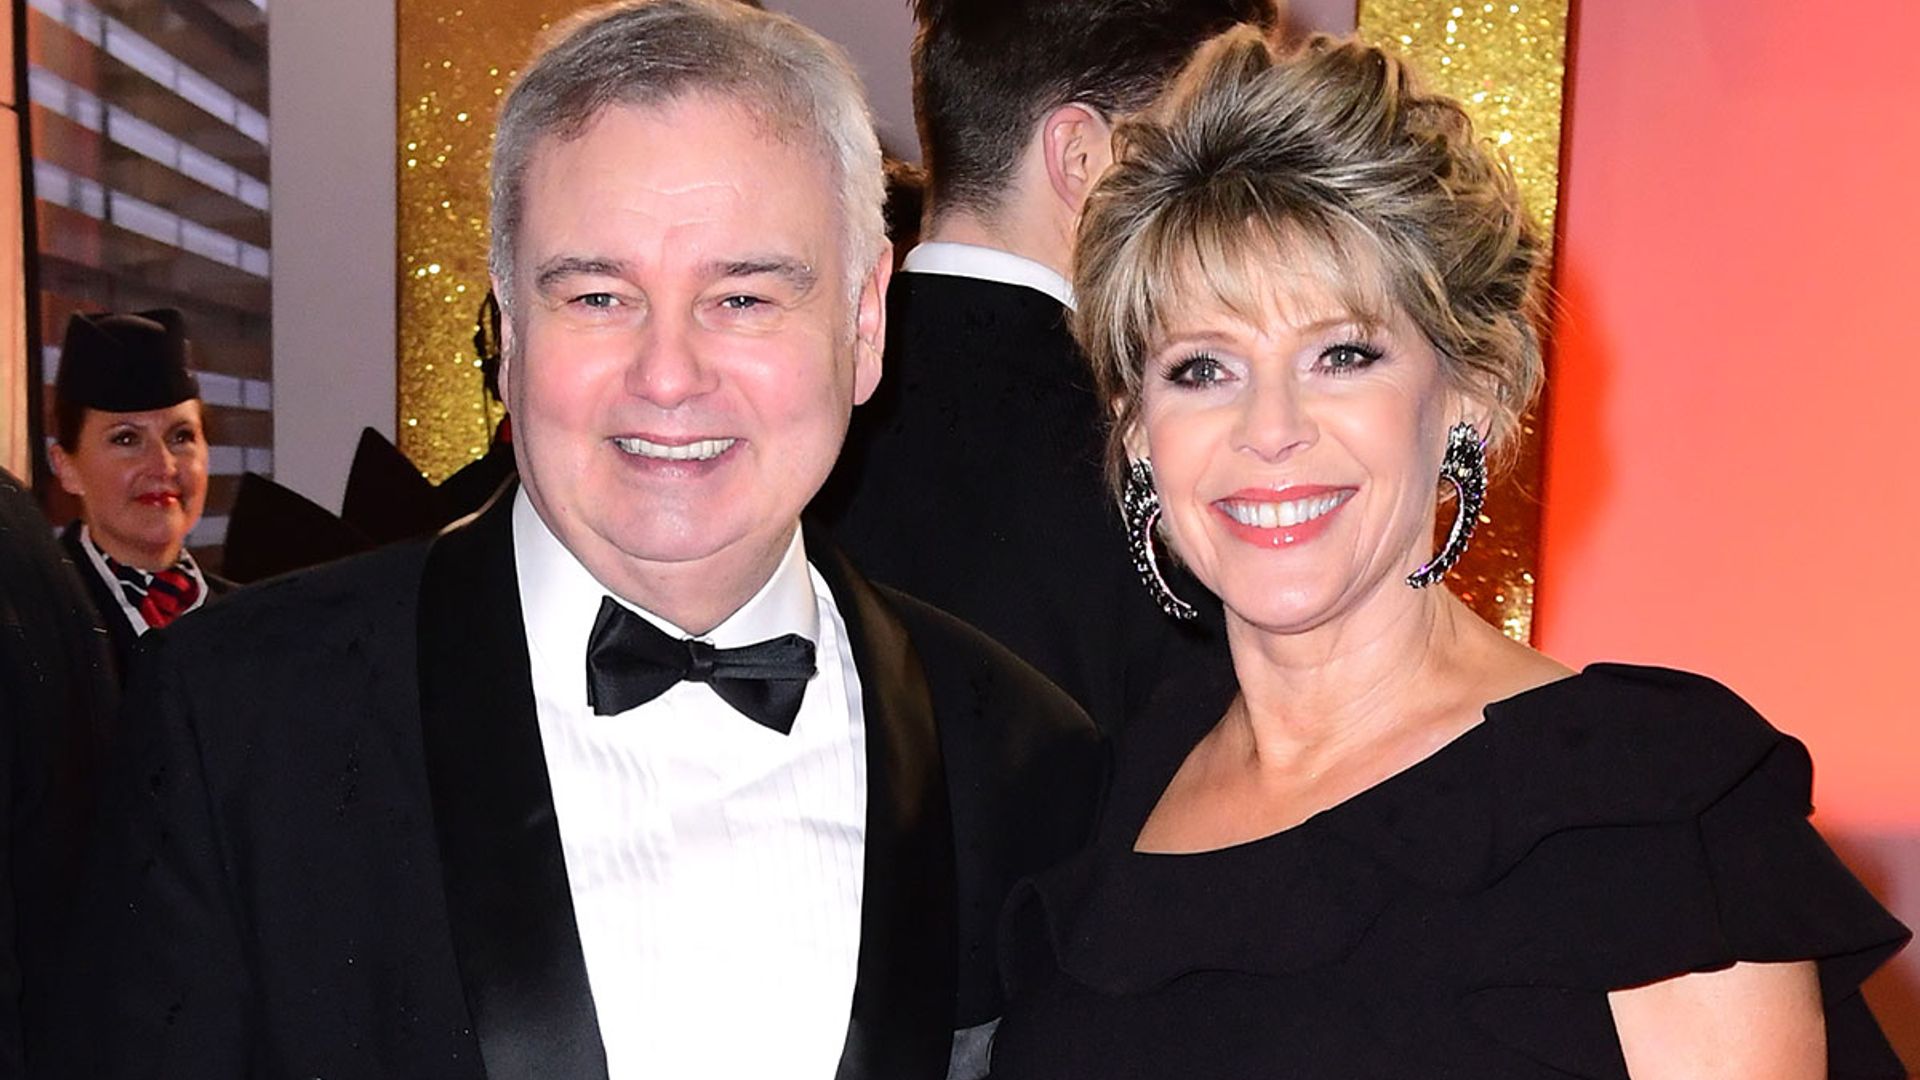 Ruth Langsford clarifies comment on being 'fed up' with Eamonn Holmes amid his health battle